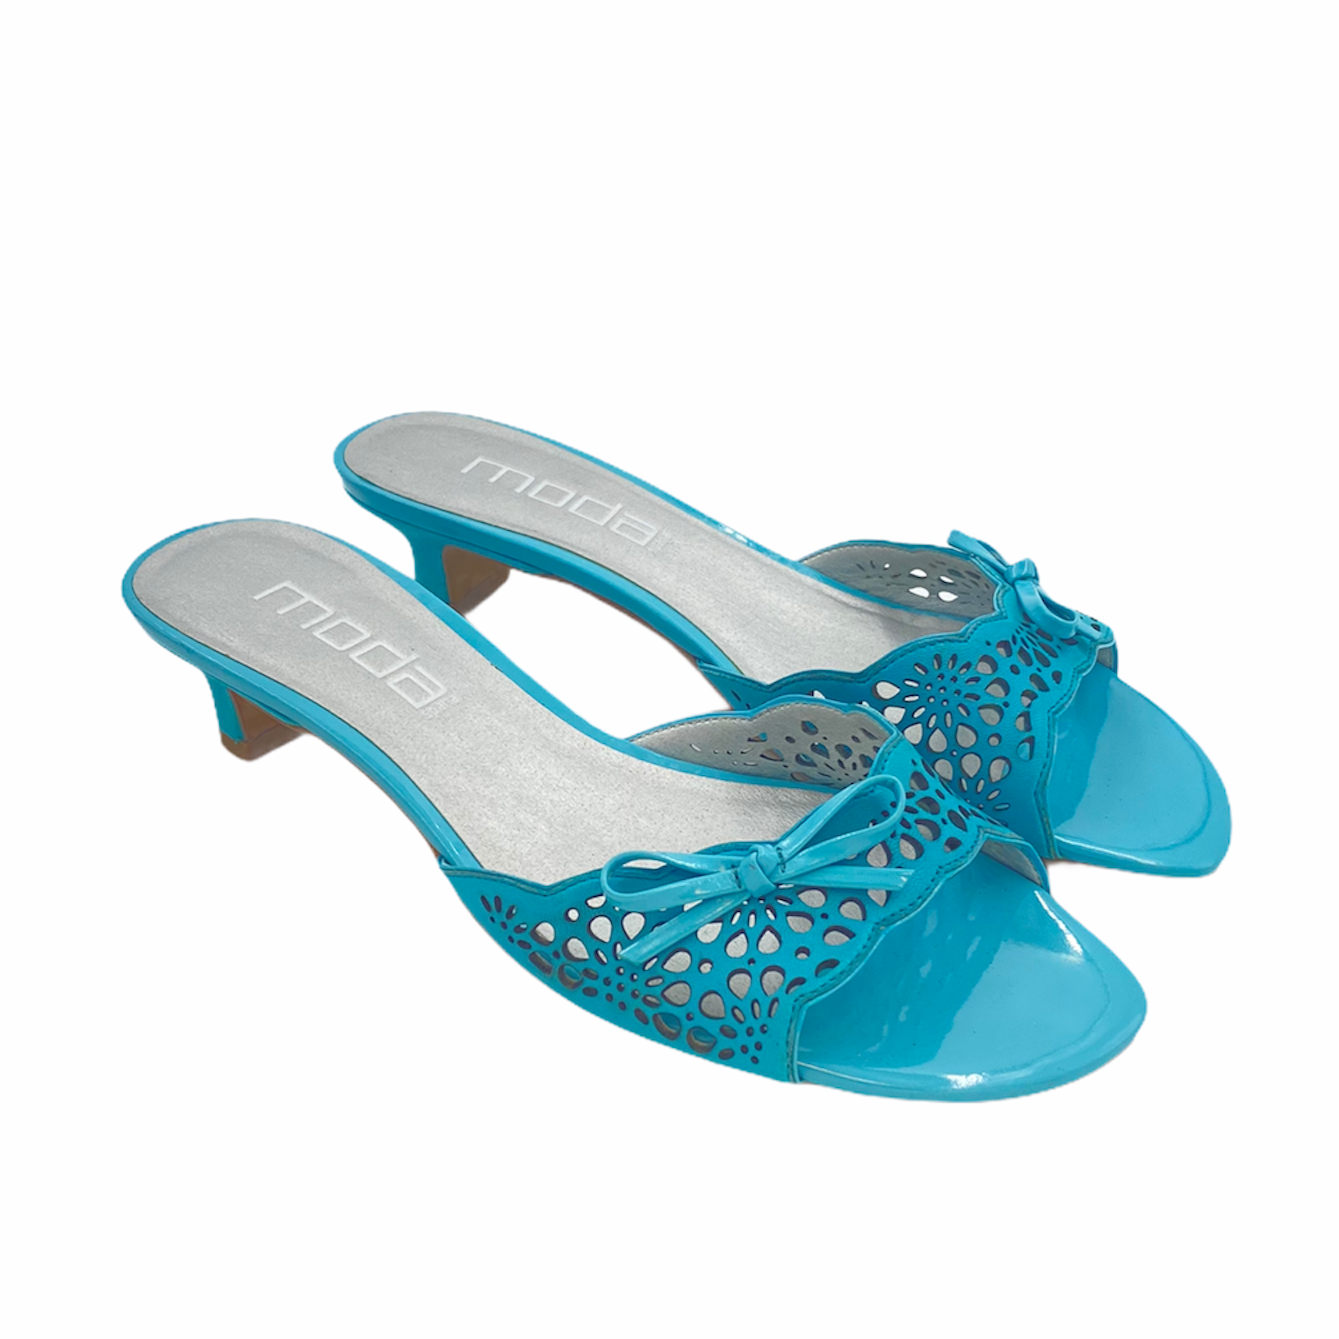 Turquoise Patent Leather Mules Size: 6